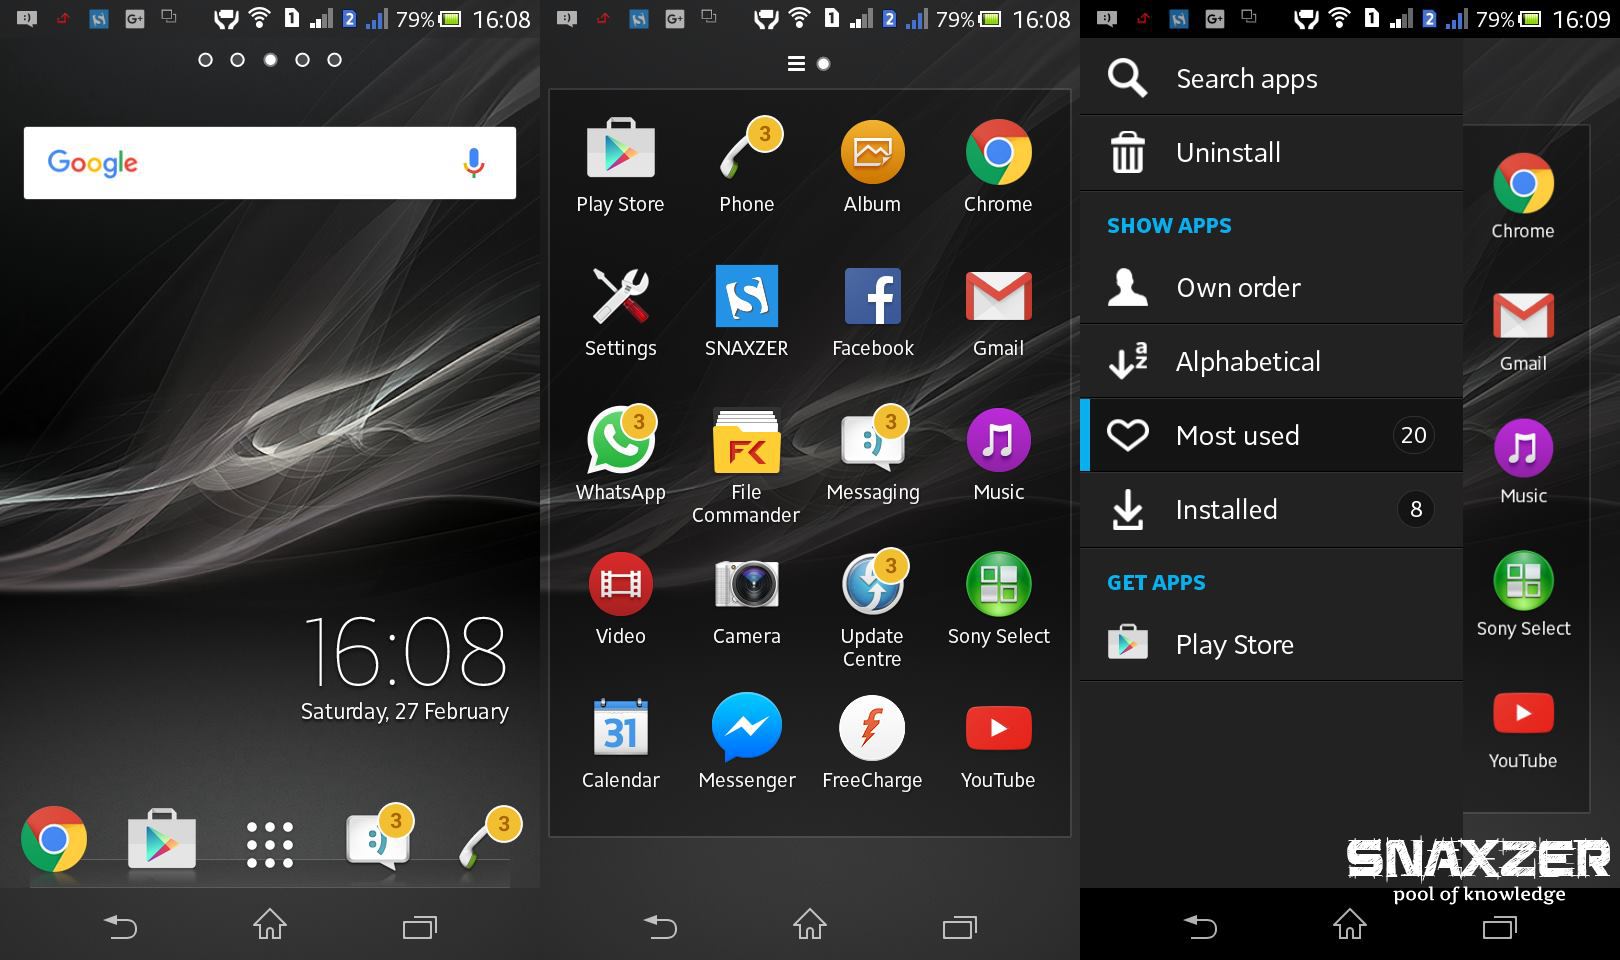 Xperia PLAY games launcher for Android - Download the APK from Uptodown